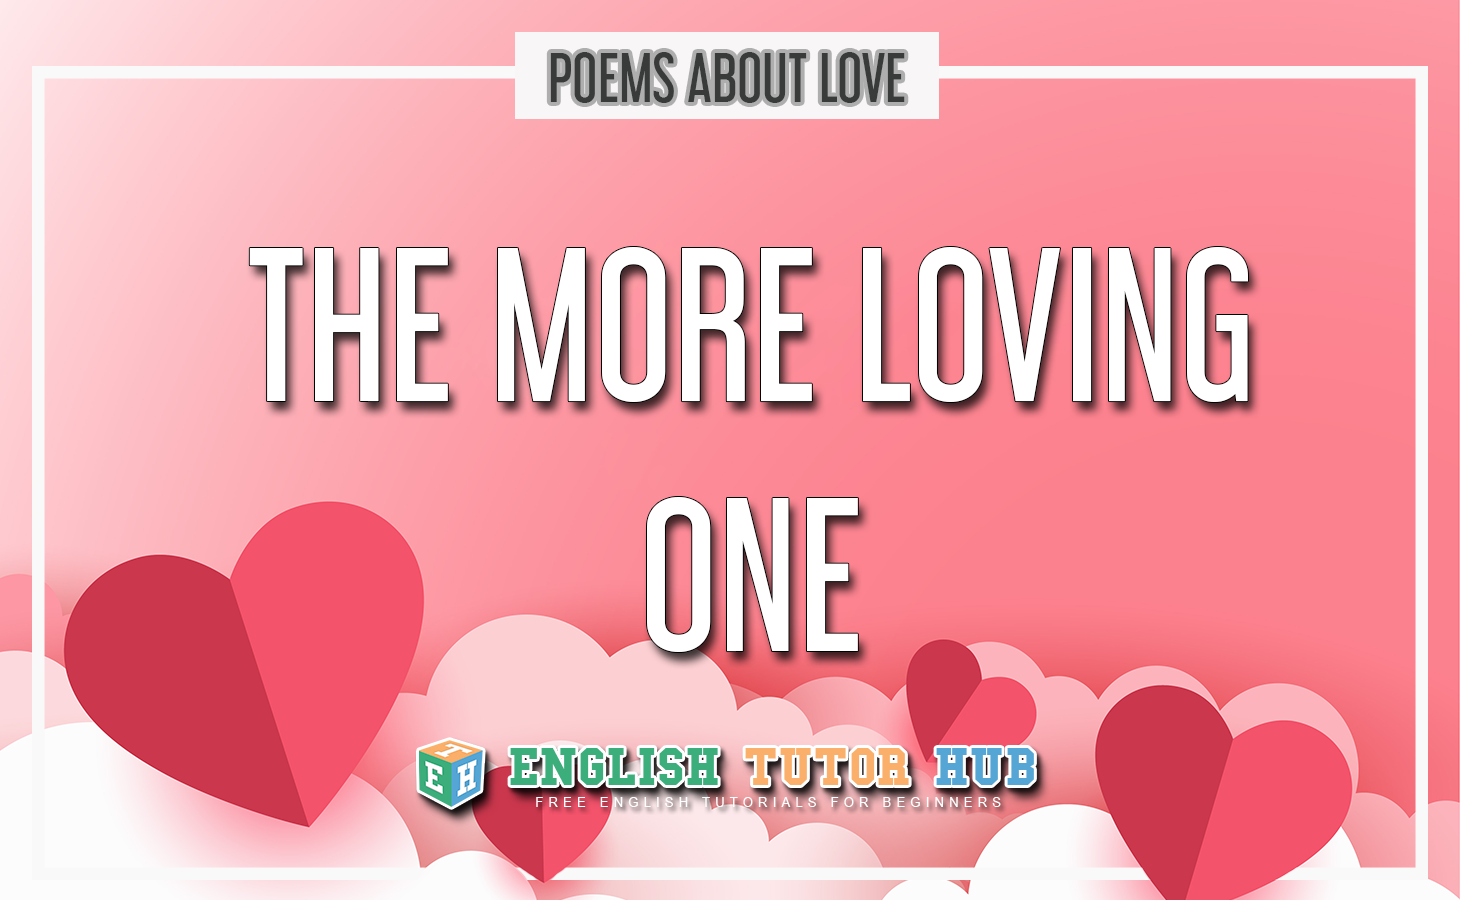 The More Loving One - Poem About Love Summary and Lesson [2022]